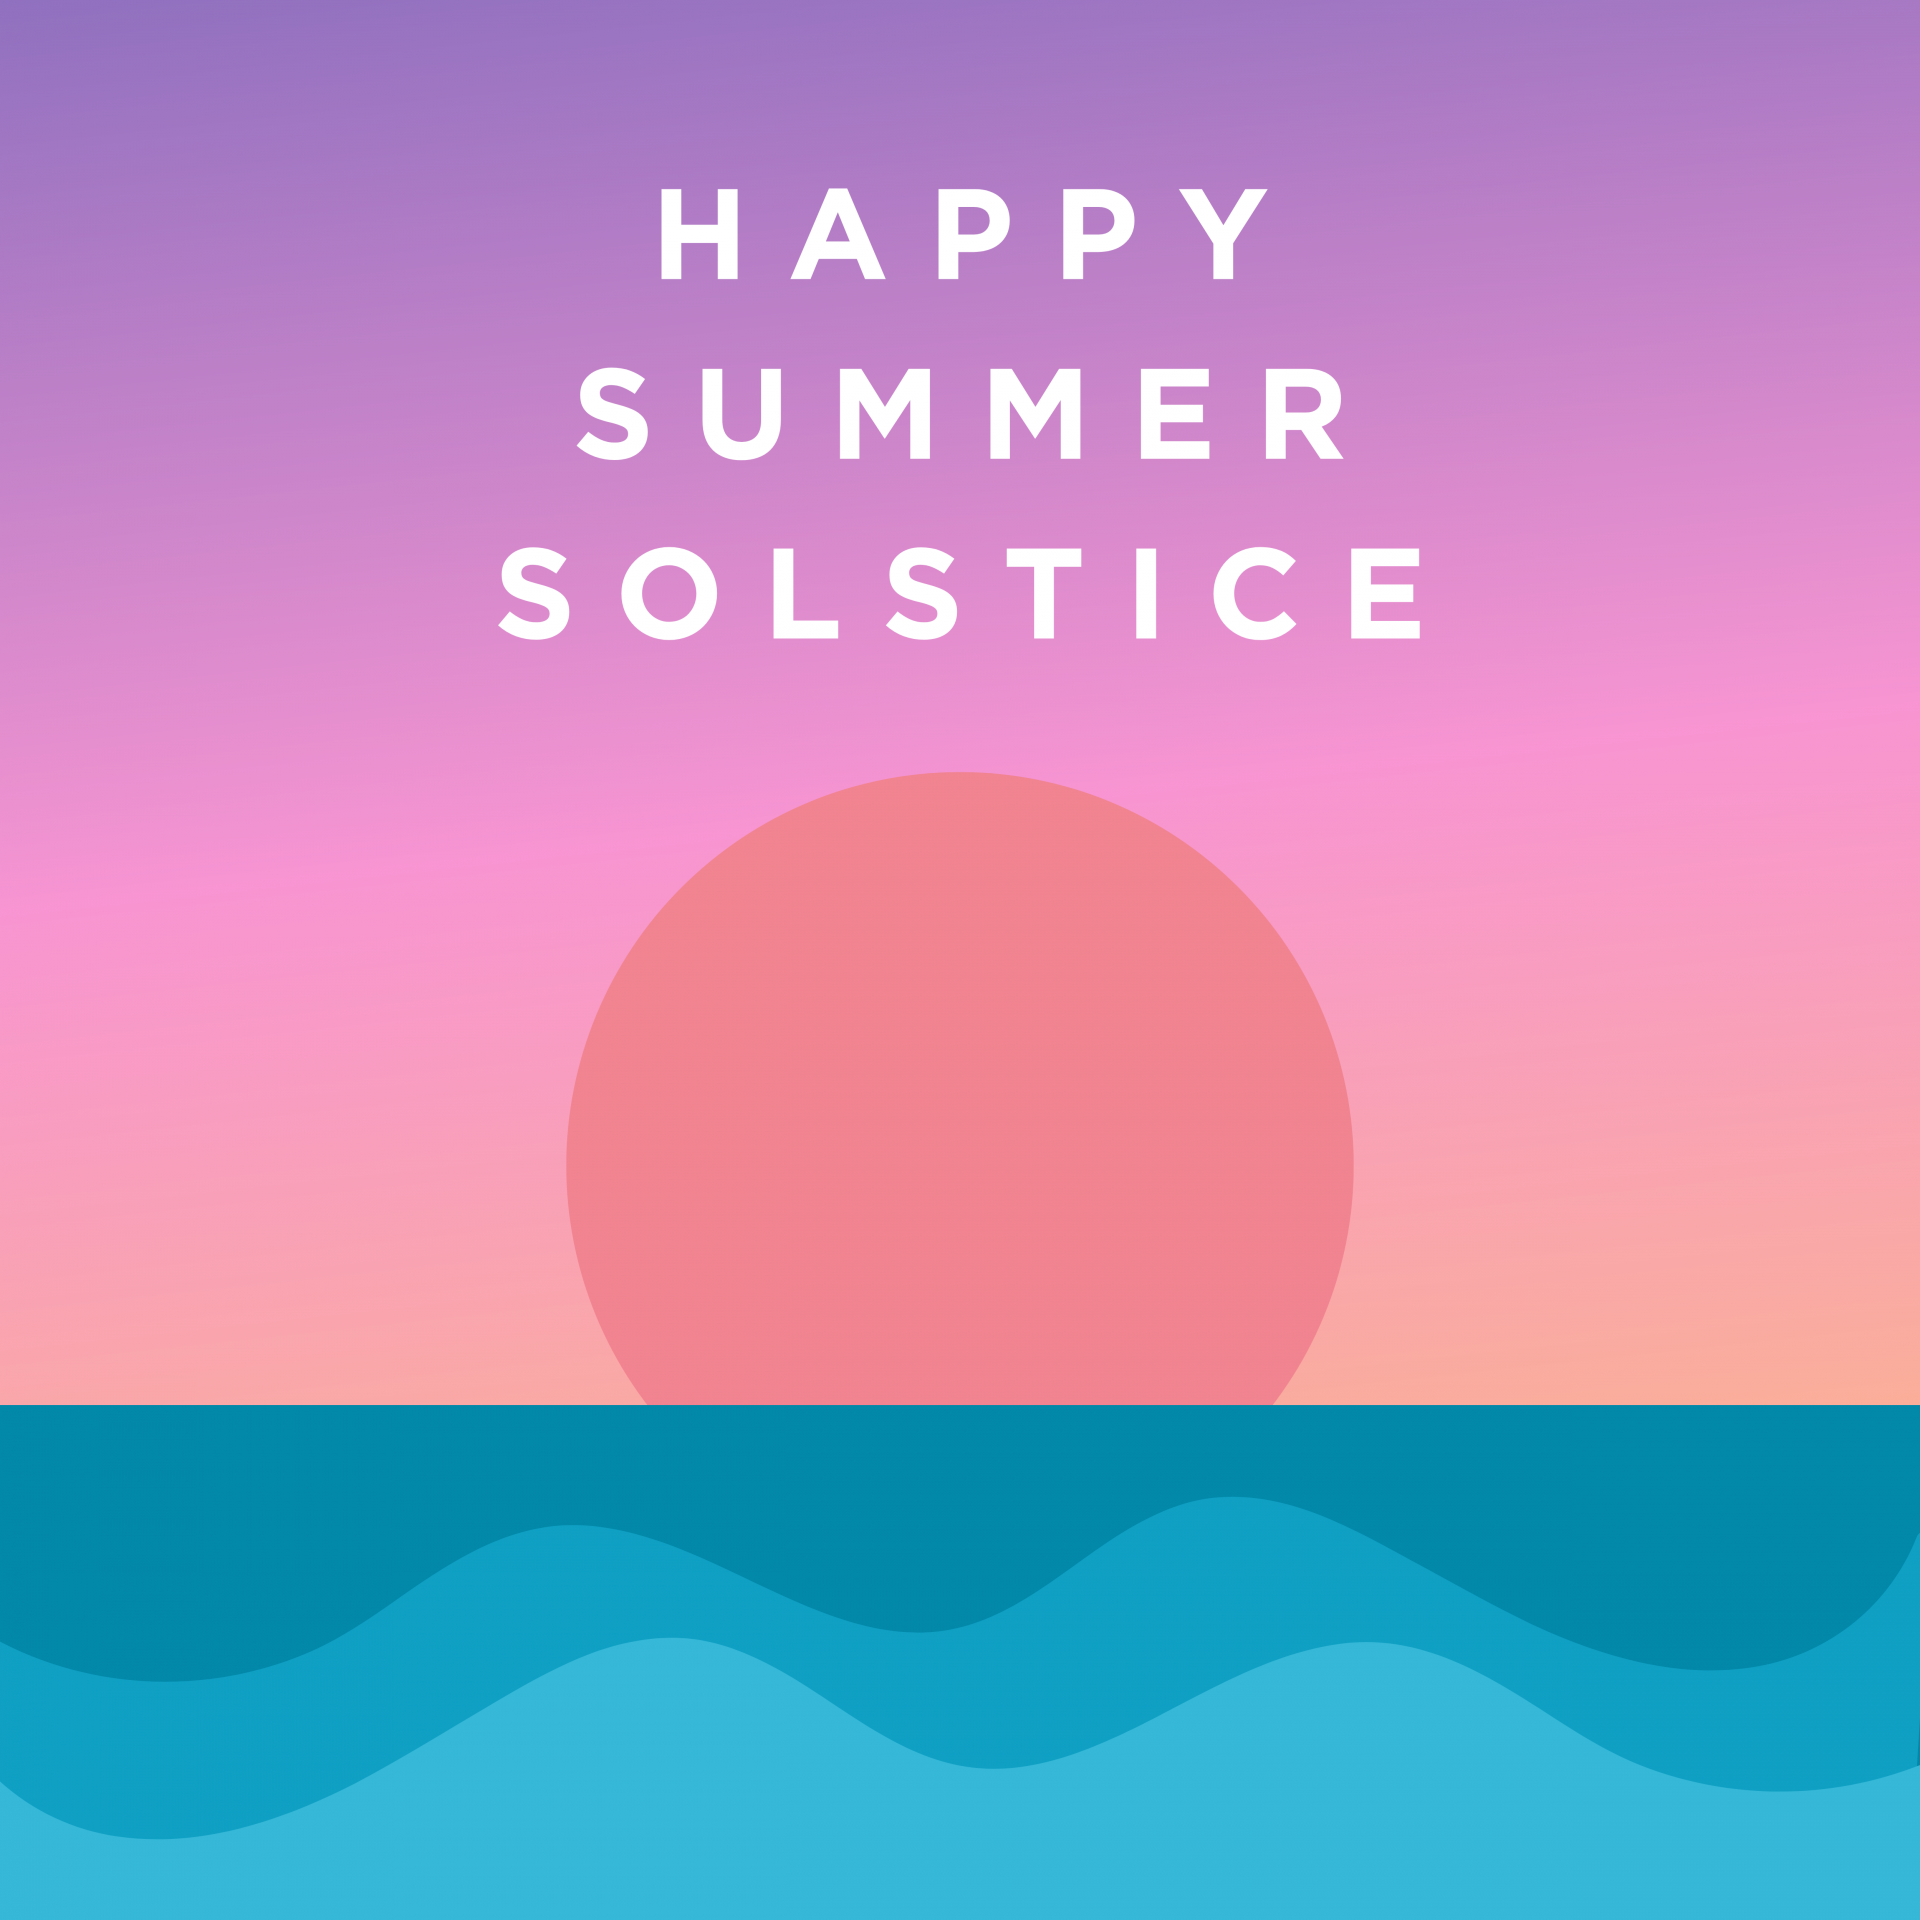 Happy Summer Solstice Greetings Free Stock Photo - Public Domain Pictures